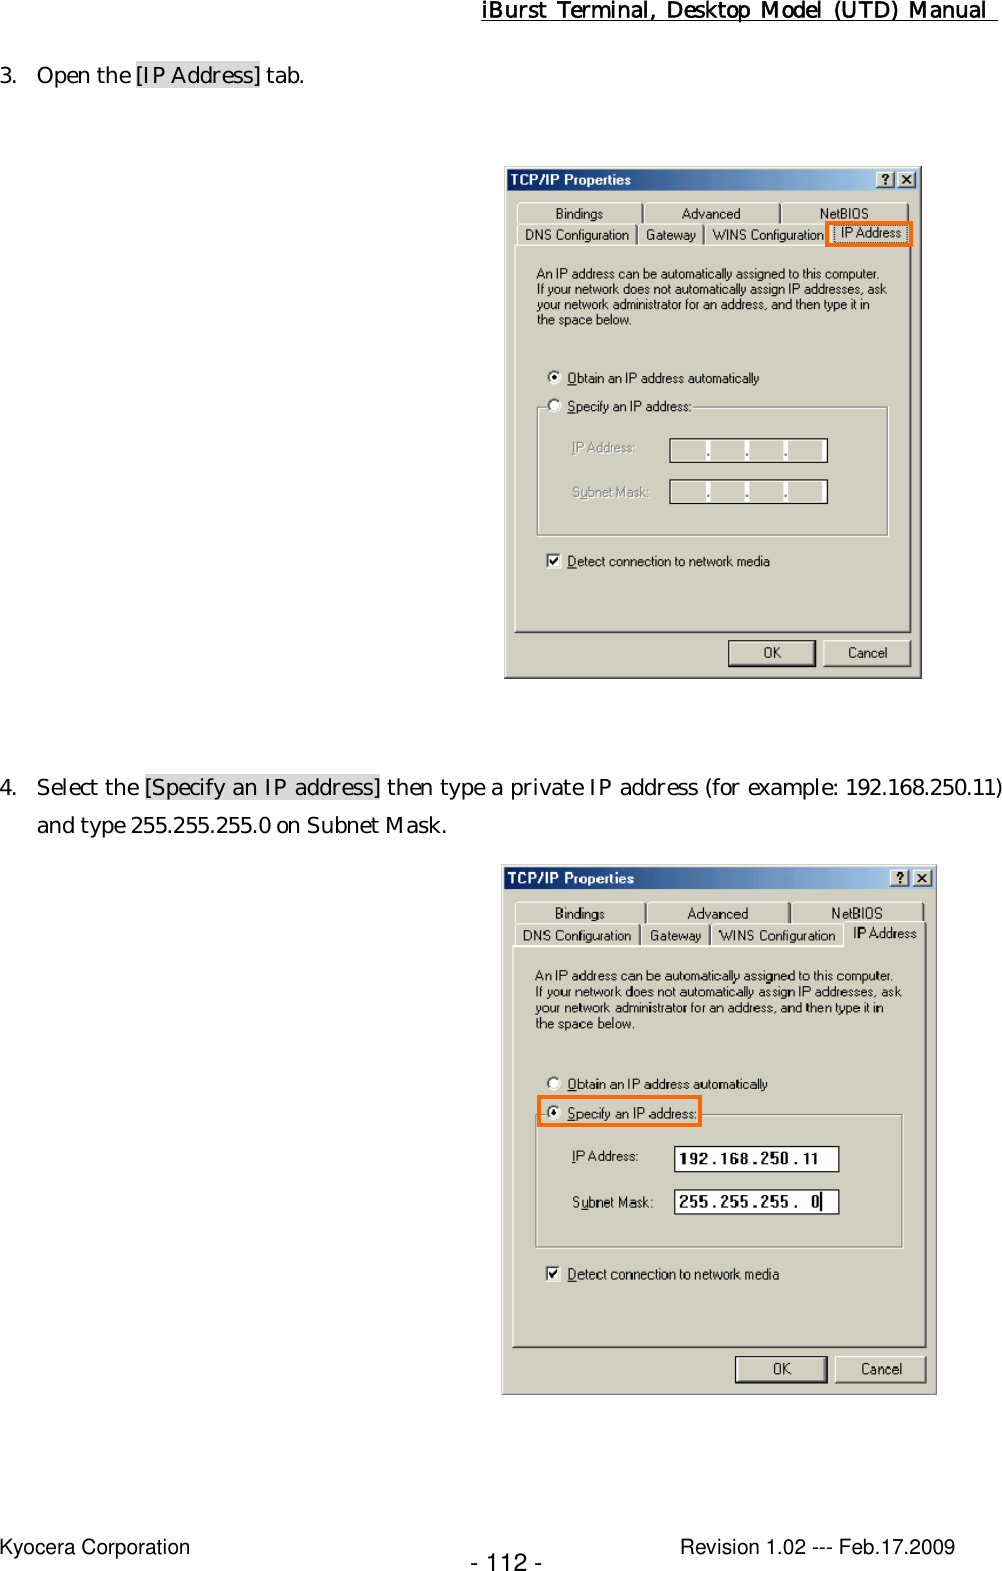 iBurst  Terminal, Desktop  Model  (UTD)  Manual    Kyocera Corporation                                                                                              Revision 1.02 --- Feb.17.2009 - 112 - 3. Open the [IP Address] tab.                   4. Select the [Specify an IP address] then type a private IP address (for example: 192.168.250.11) and type 255.255.255.0 on Subnet Mask.                   